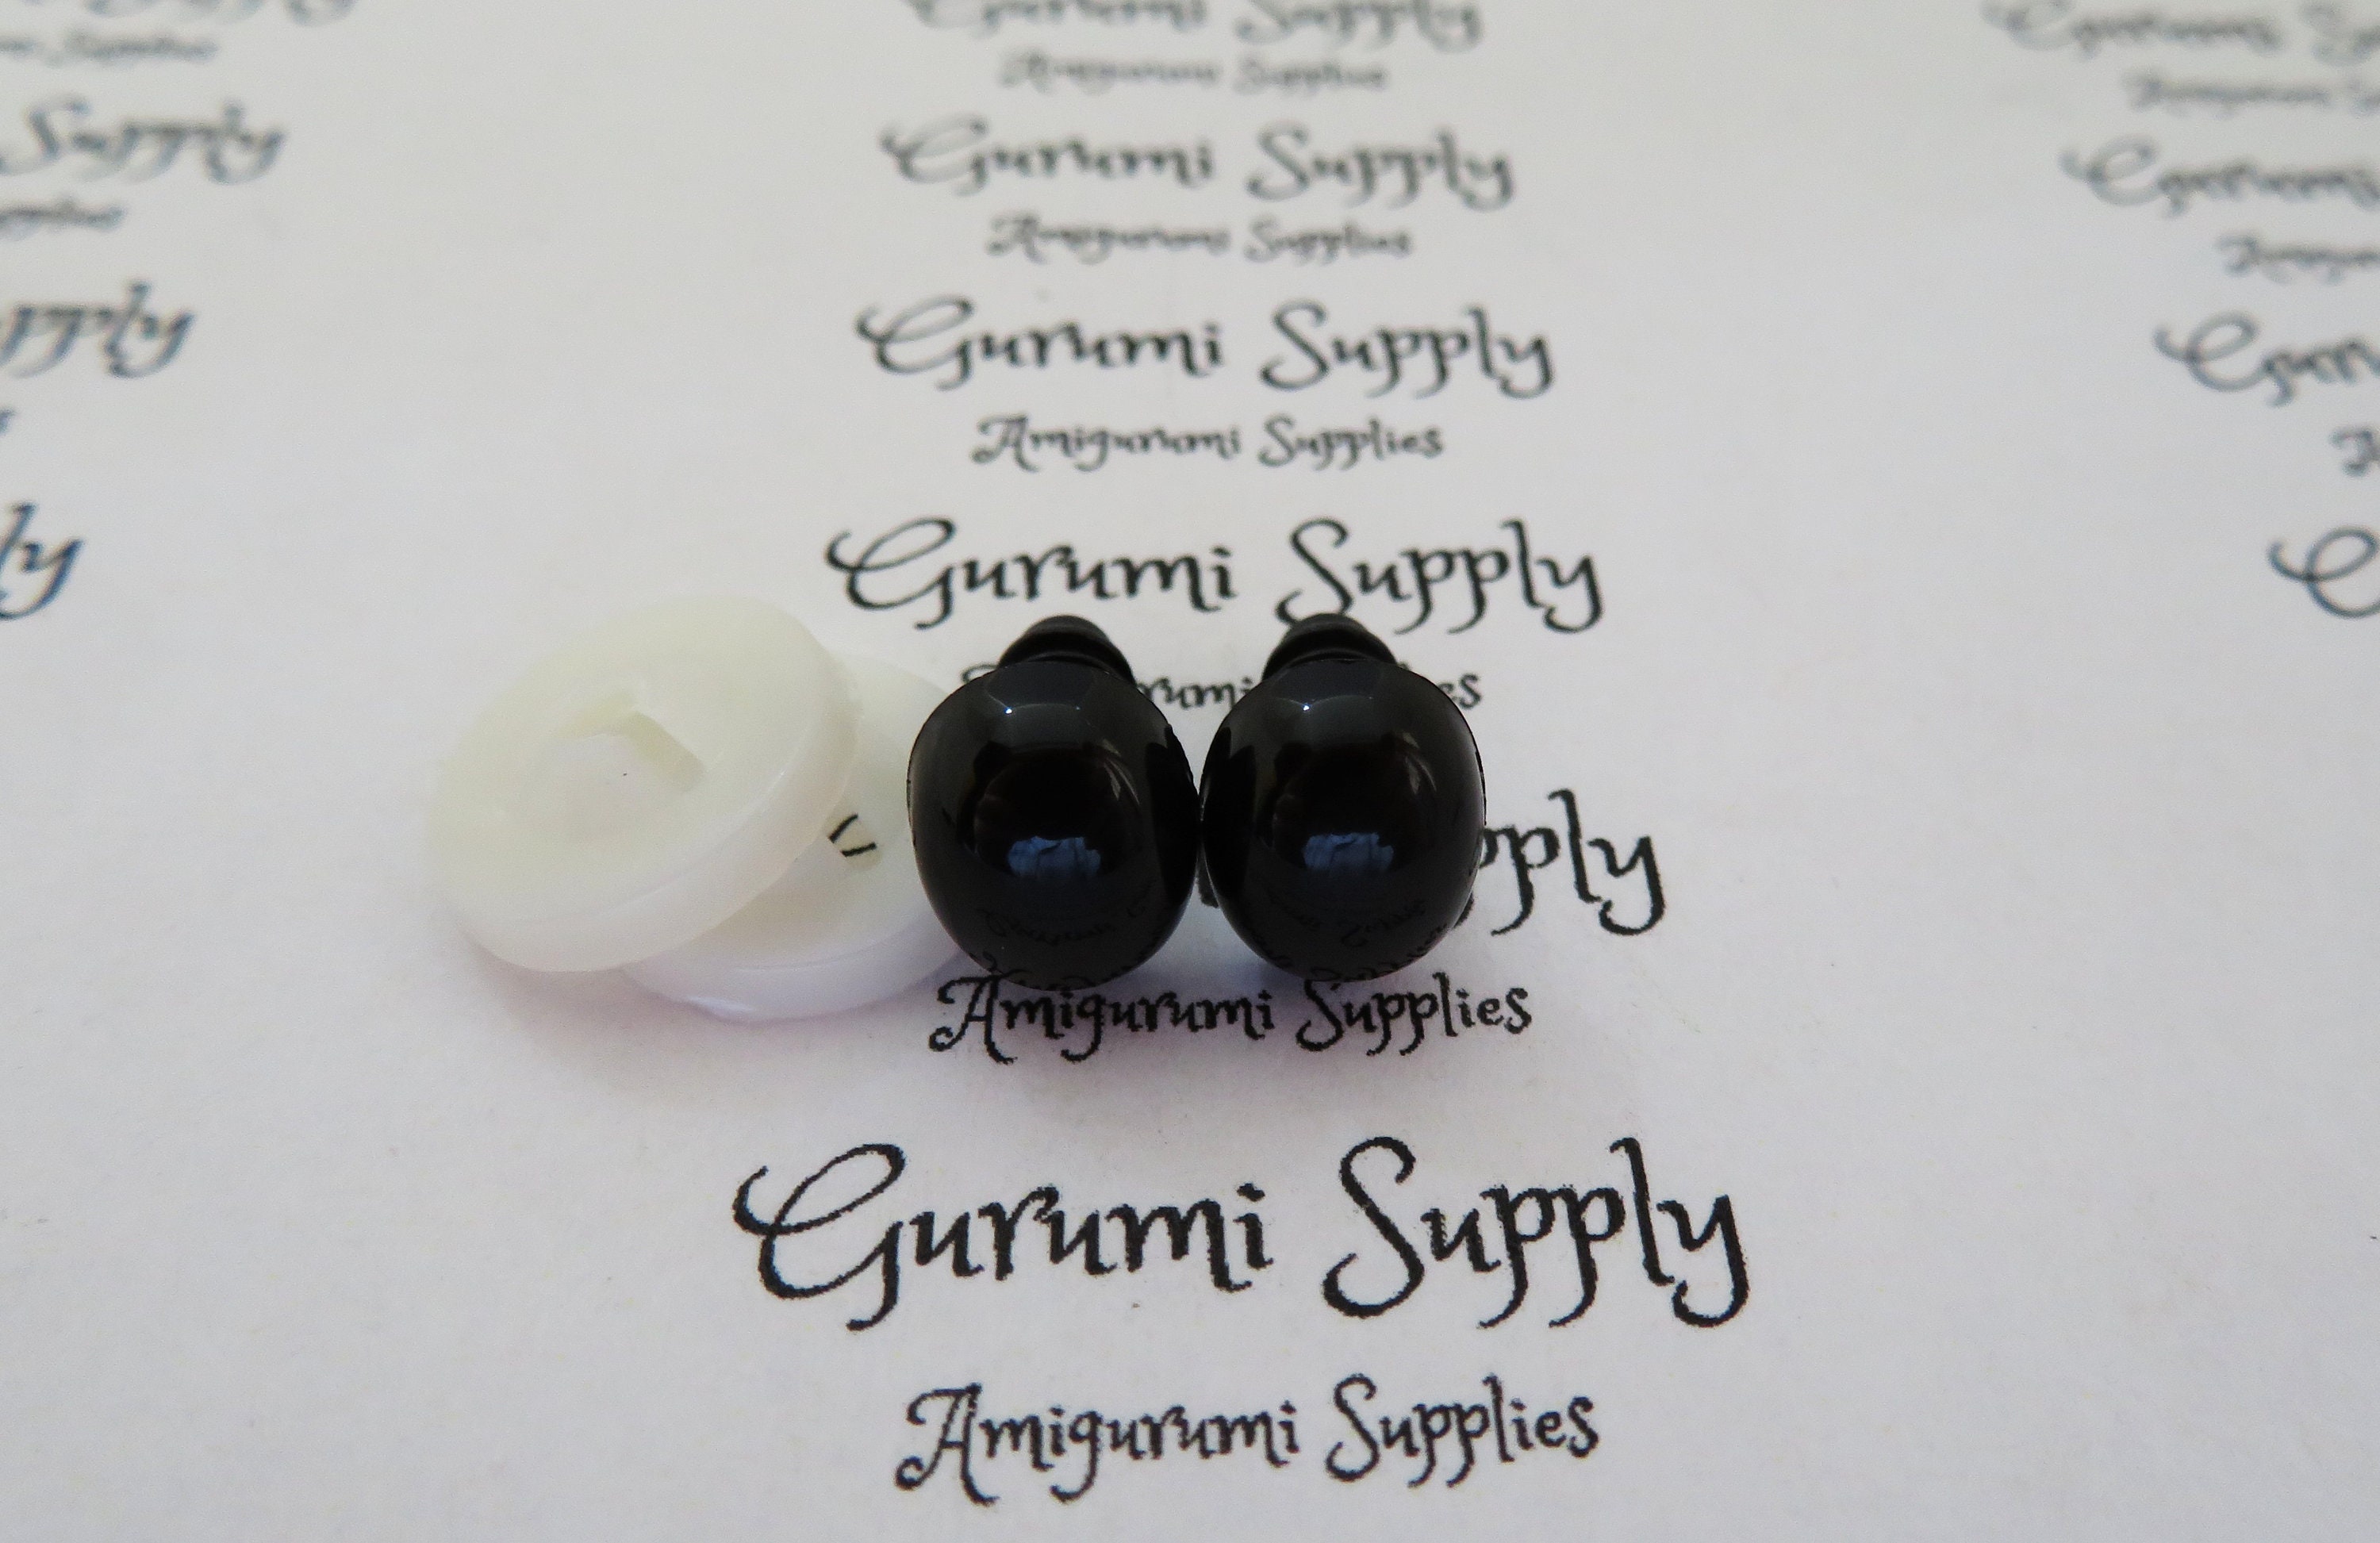 8x10mm Solid Black Oval Safety Eyes/Noses and Washers: 2 Pairs